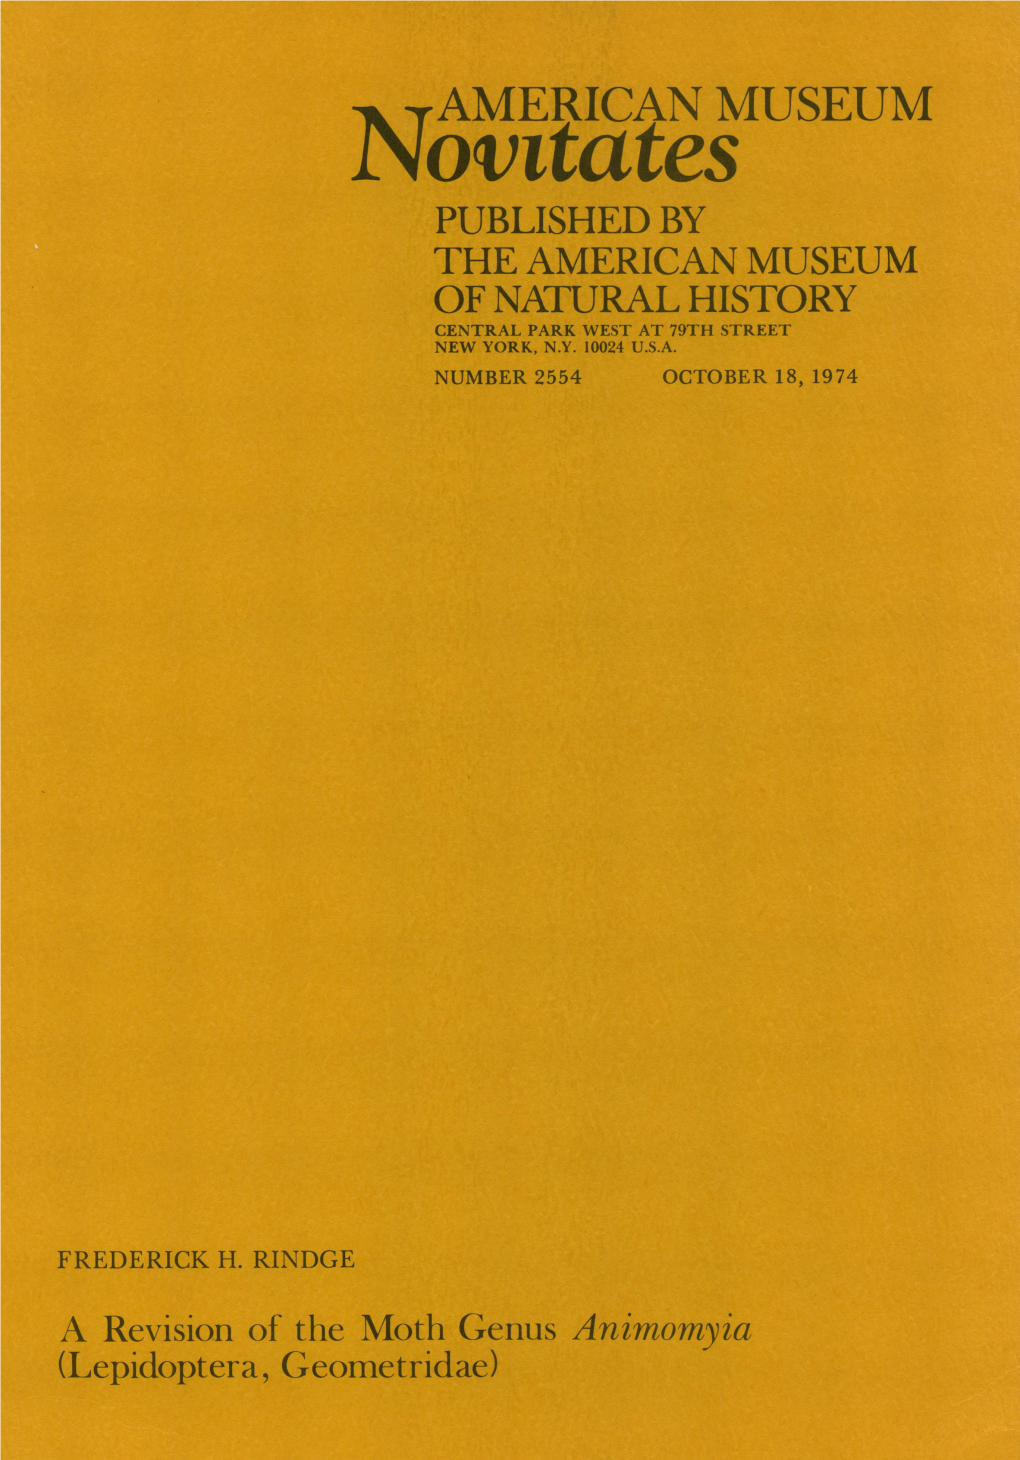 THE Amerlican MUSEUM